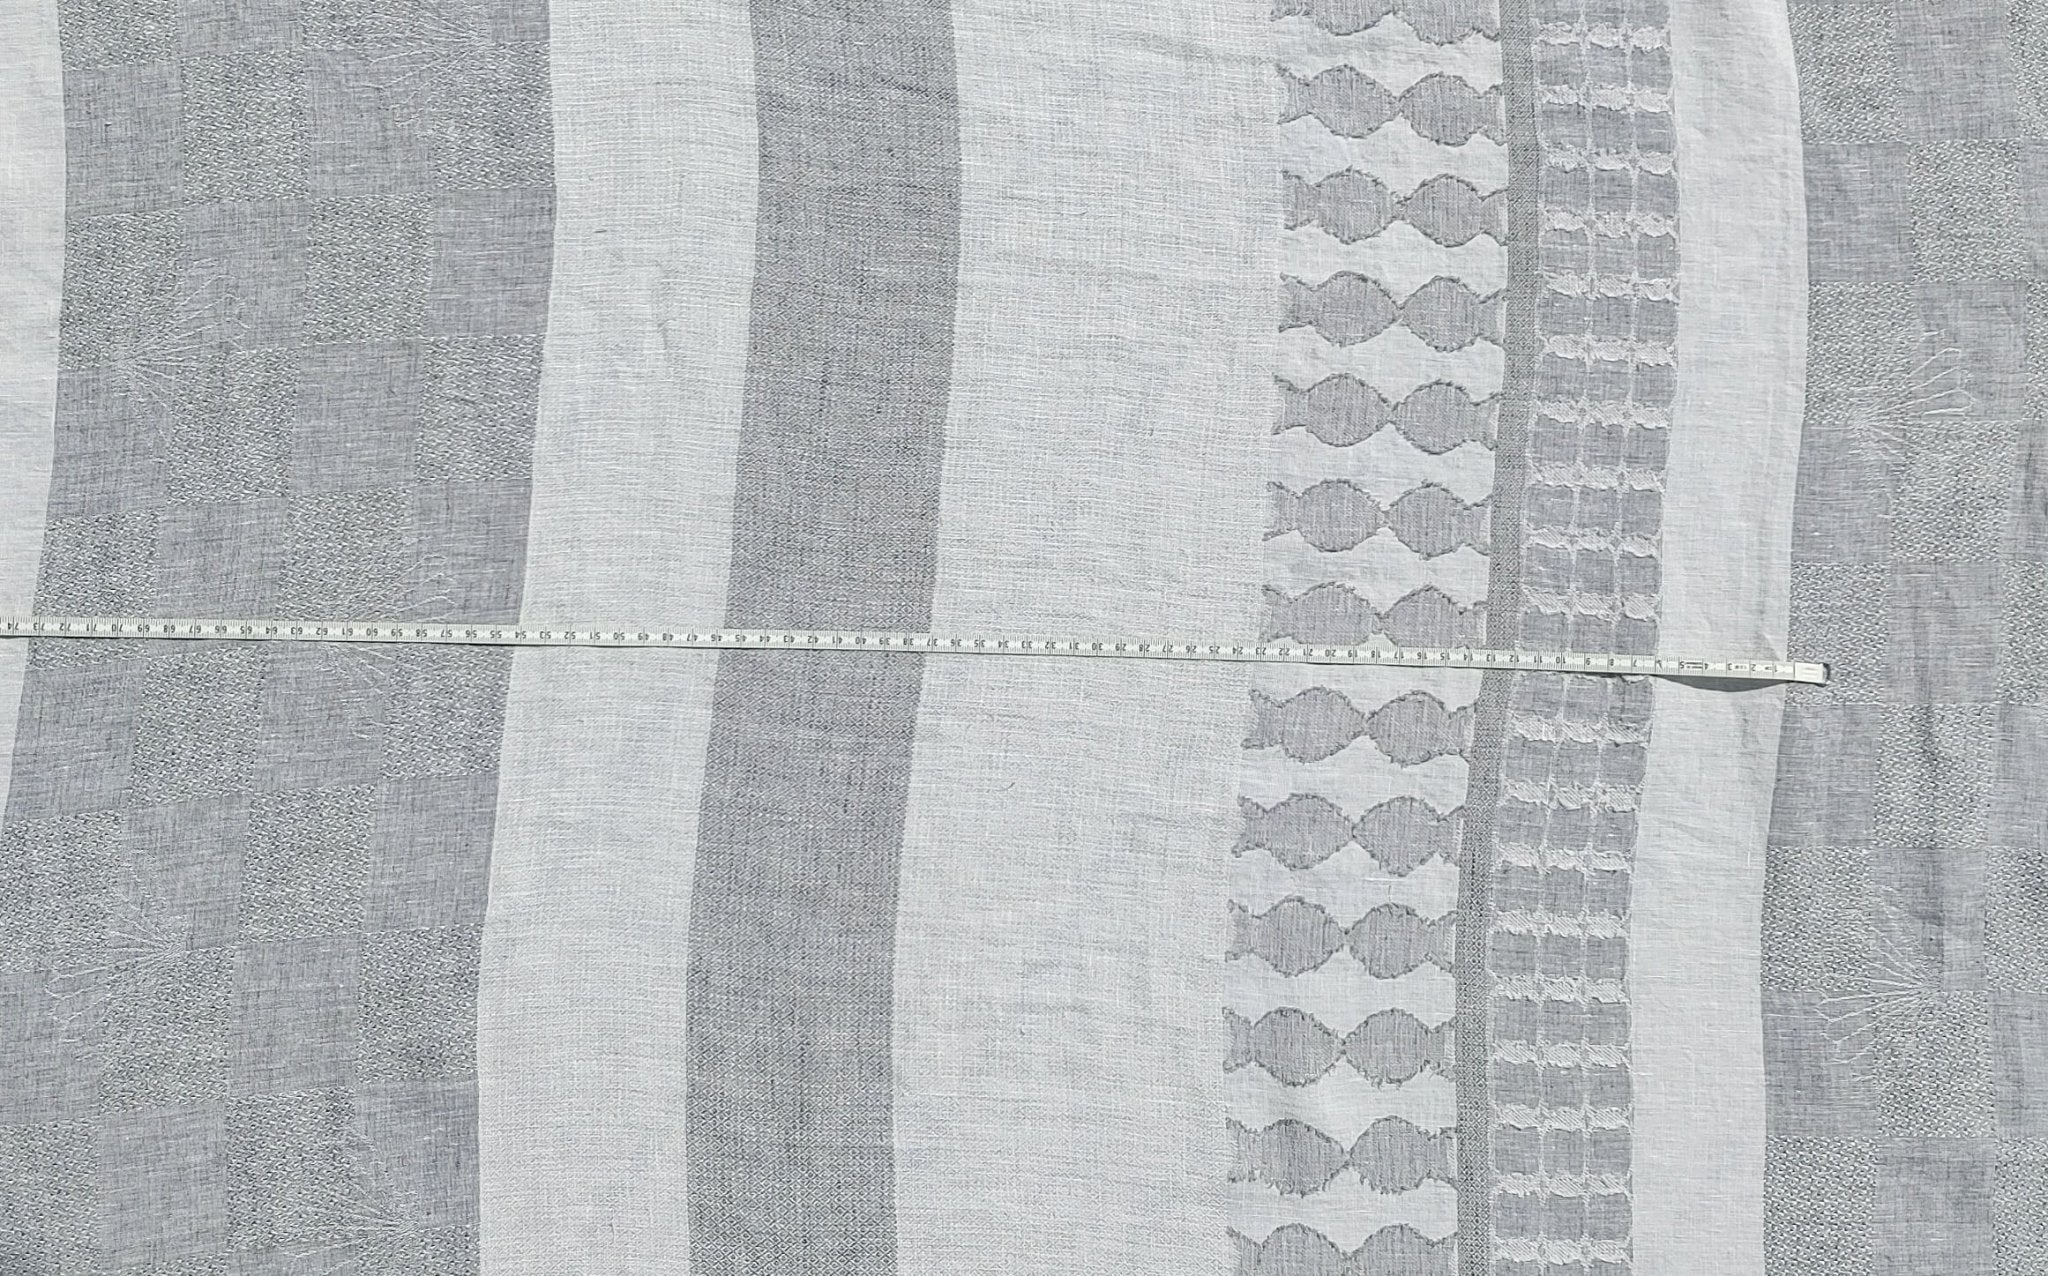 100% Linen Jacquard Weave Fabric with Multi-Pattern Design 6503 - The Linen Lab - Gray